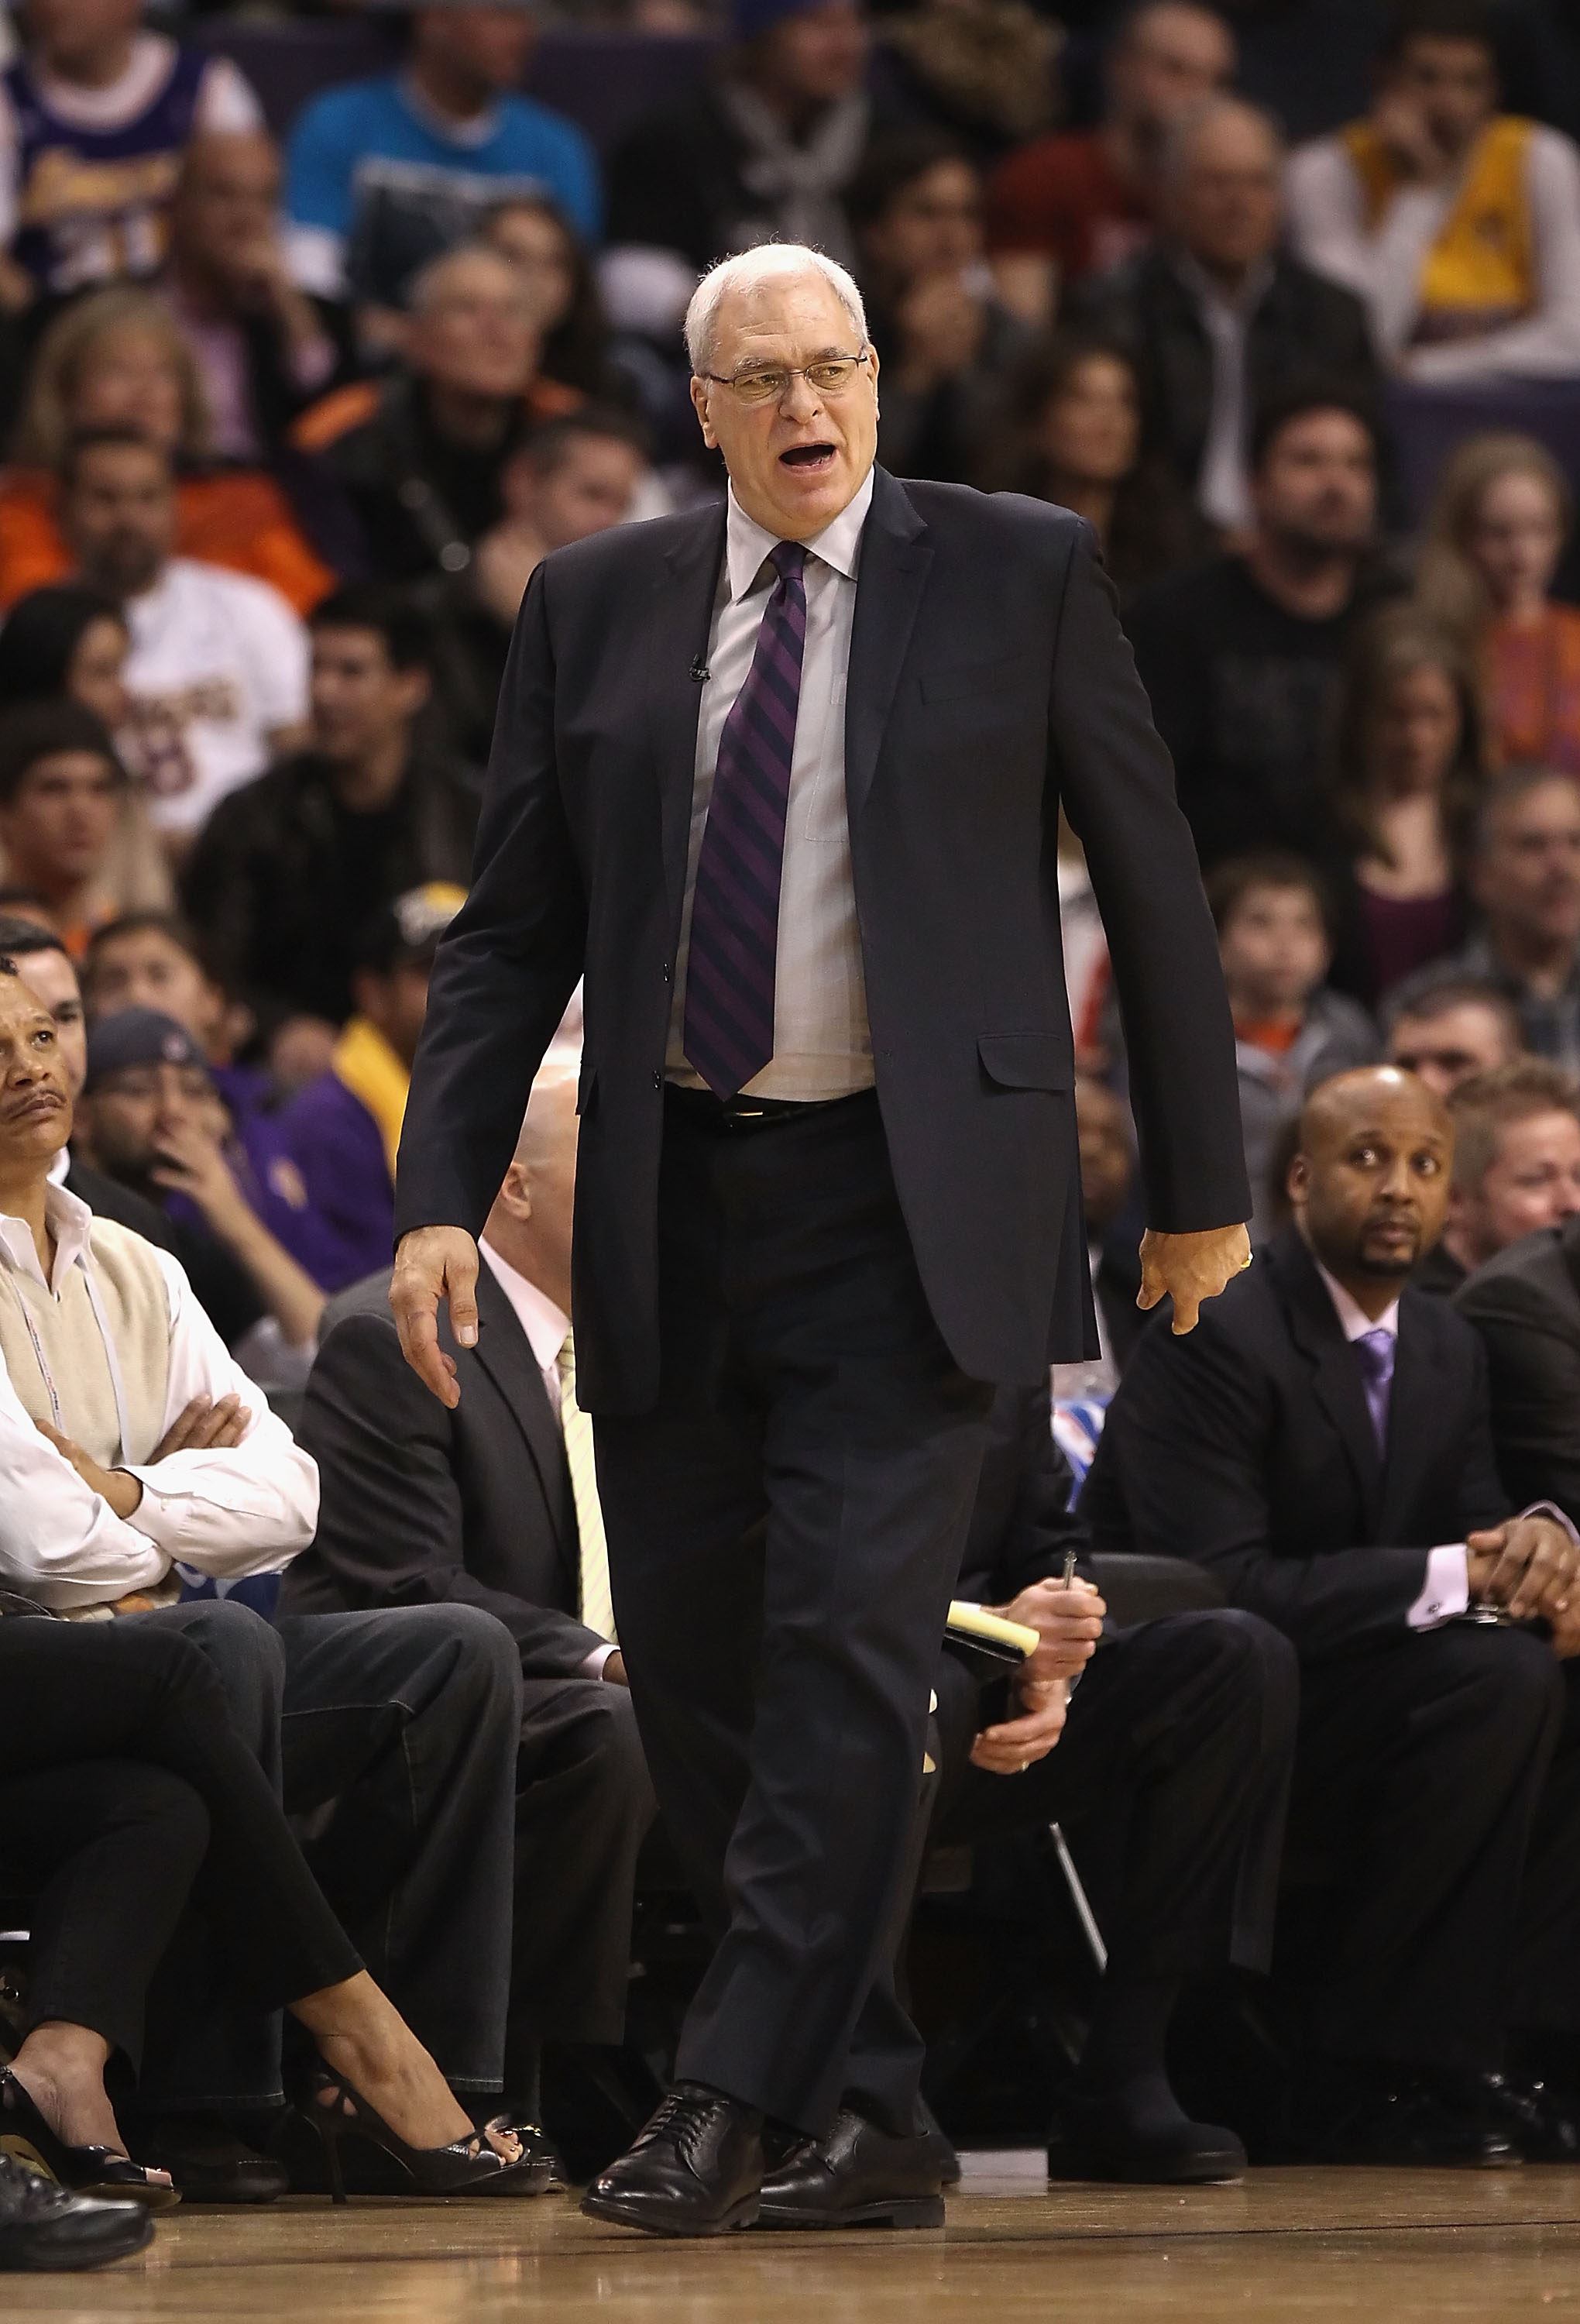 PHOENIX, AZ - JANUARY 05:  Head coach Phil Jackson of the Los Angeles Lakers during the NBA game against the Phoenix Suns at US Airways Center on January 5, 2011 in Phoenix, Arizona. The Lakers defeated the Suns 99-95.  NOTE TO USER: User expressly acknow